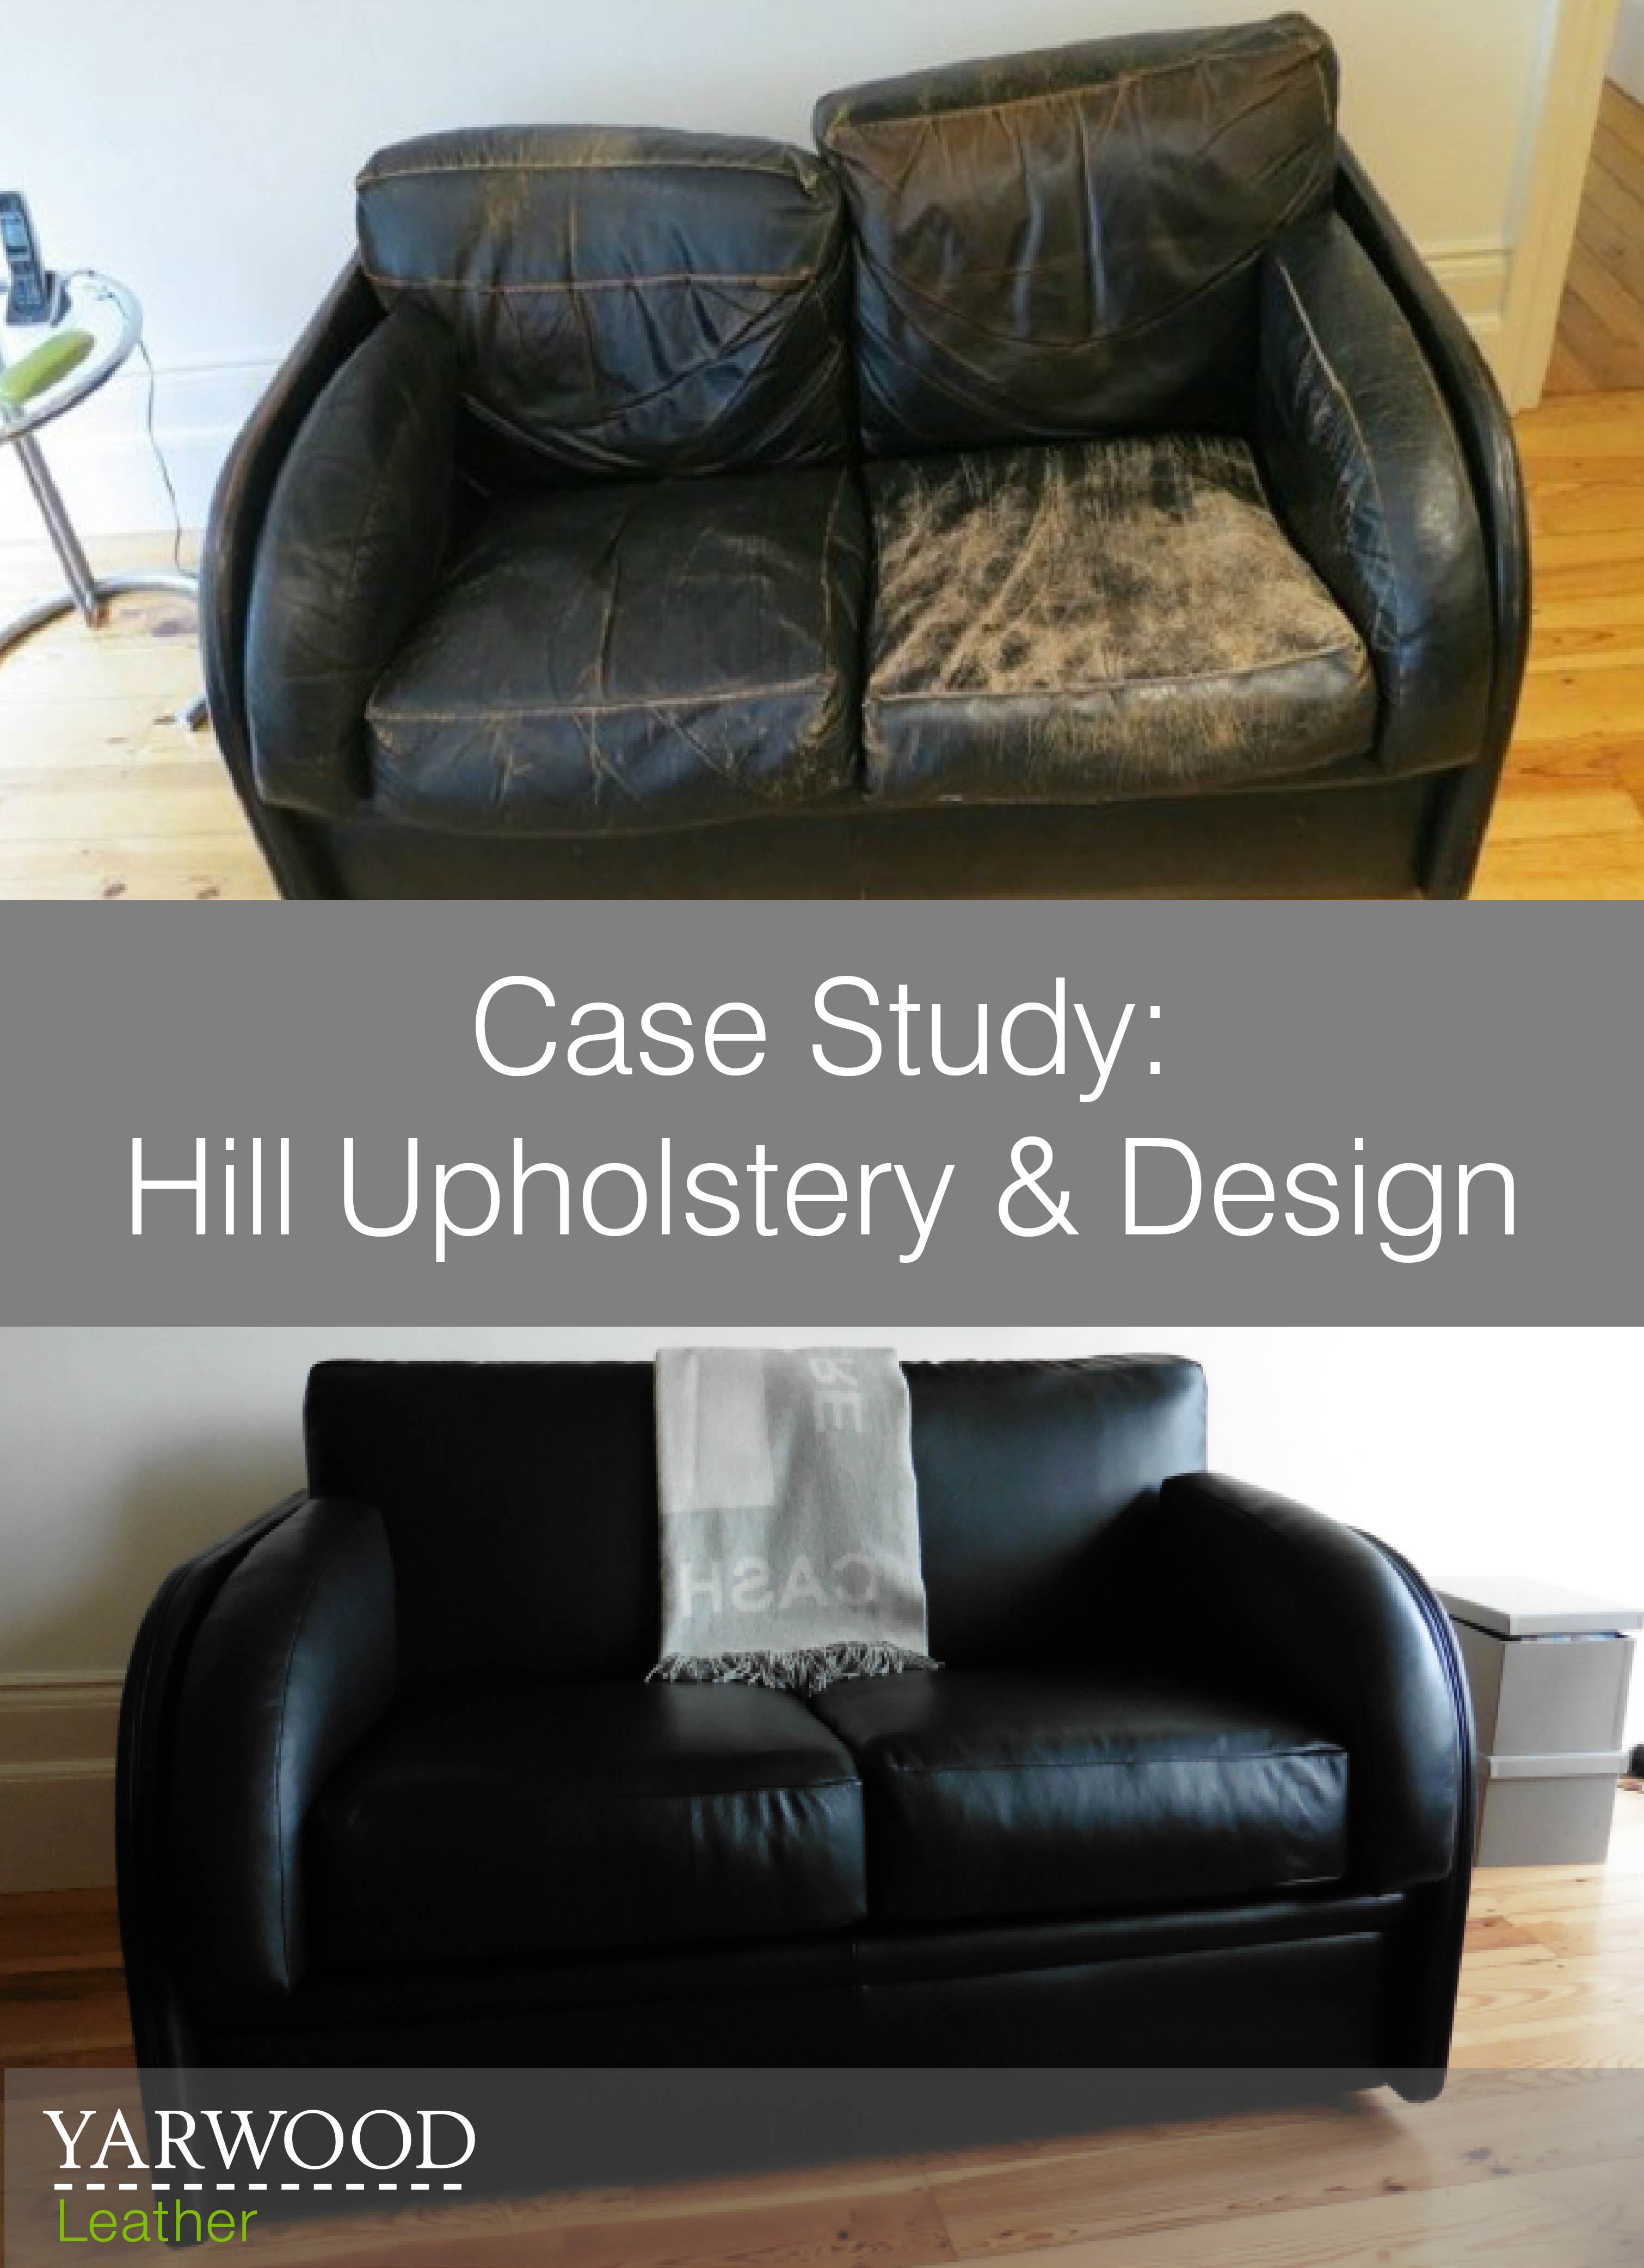 A restoration of this home furniture, by Hill Upholstery using The Chelsea Collection